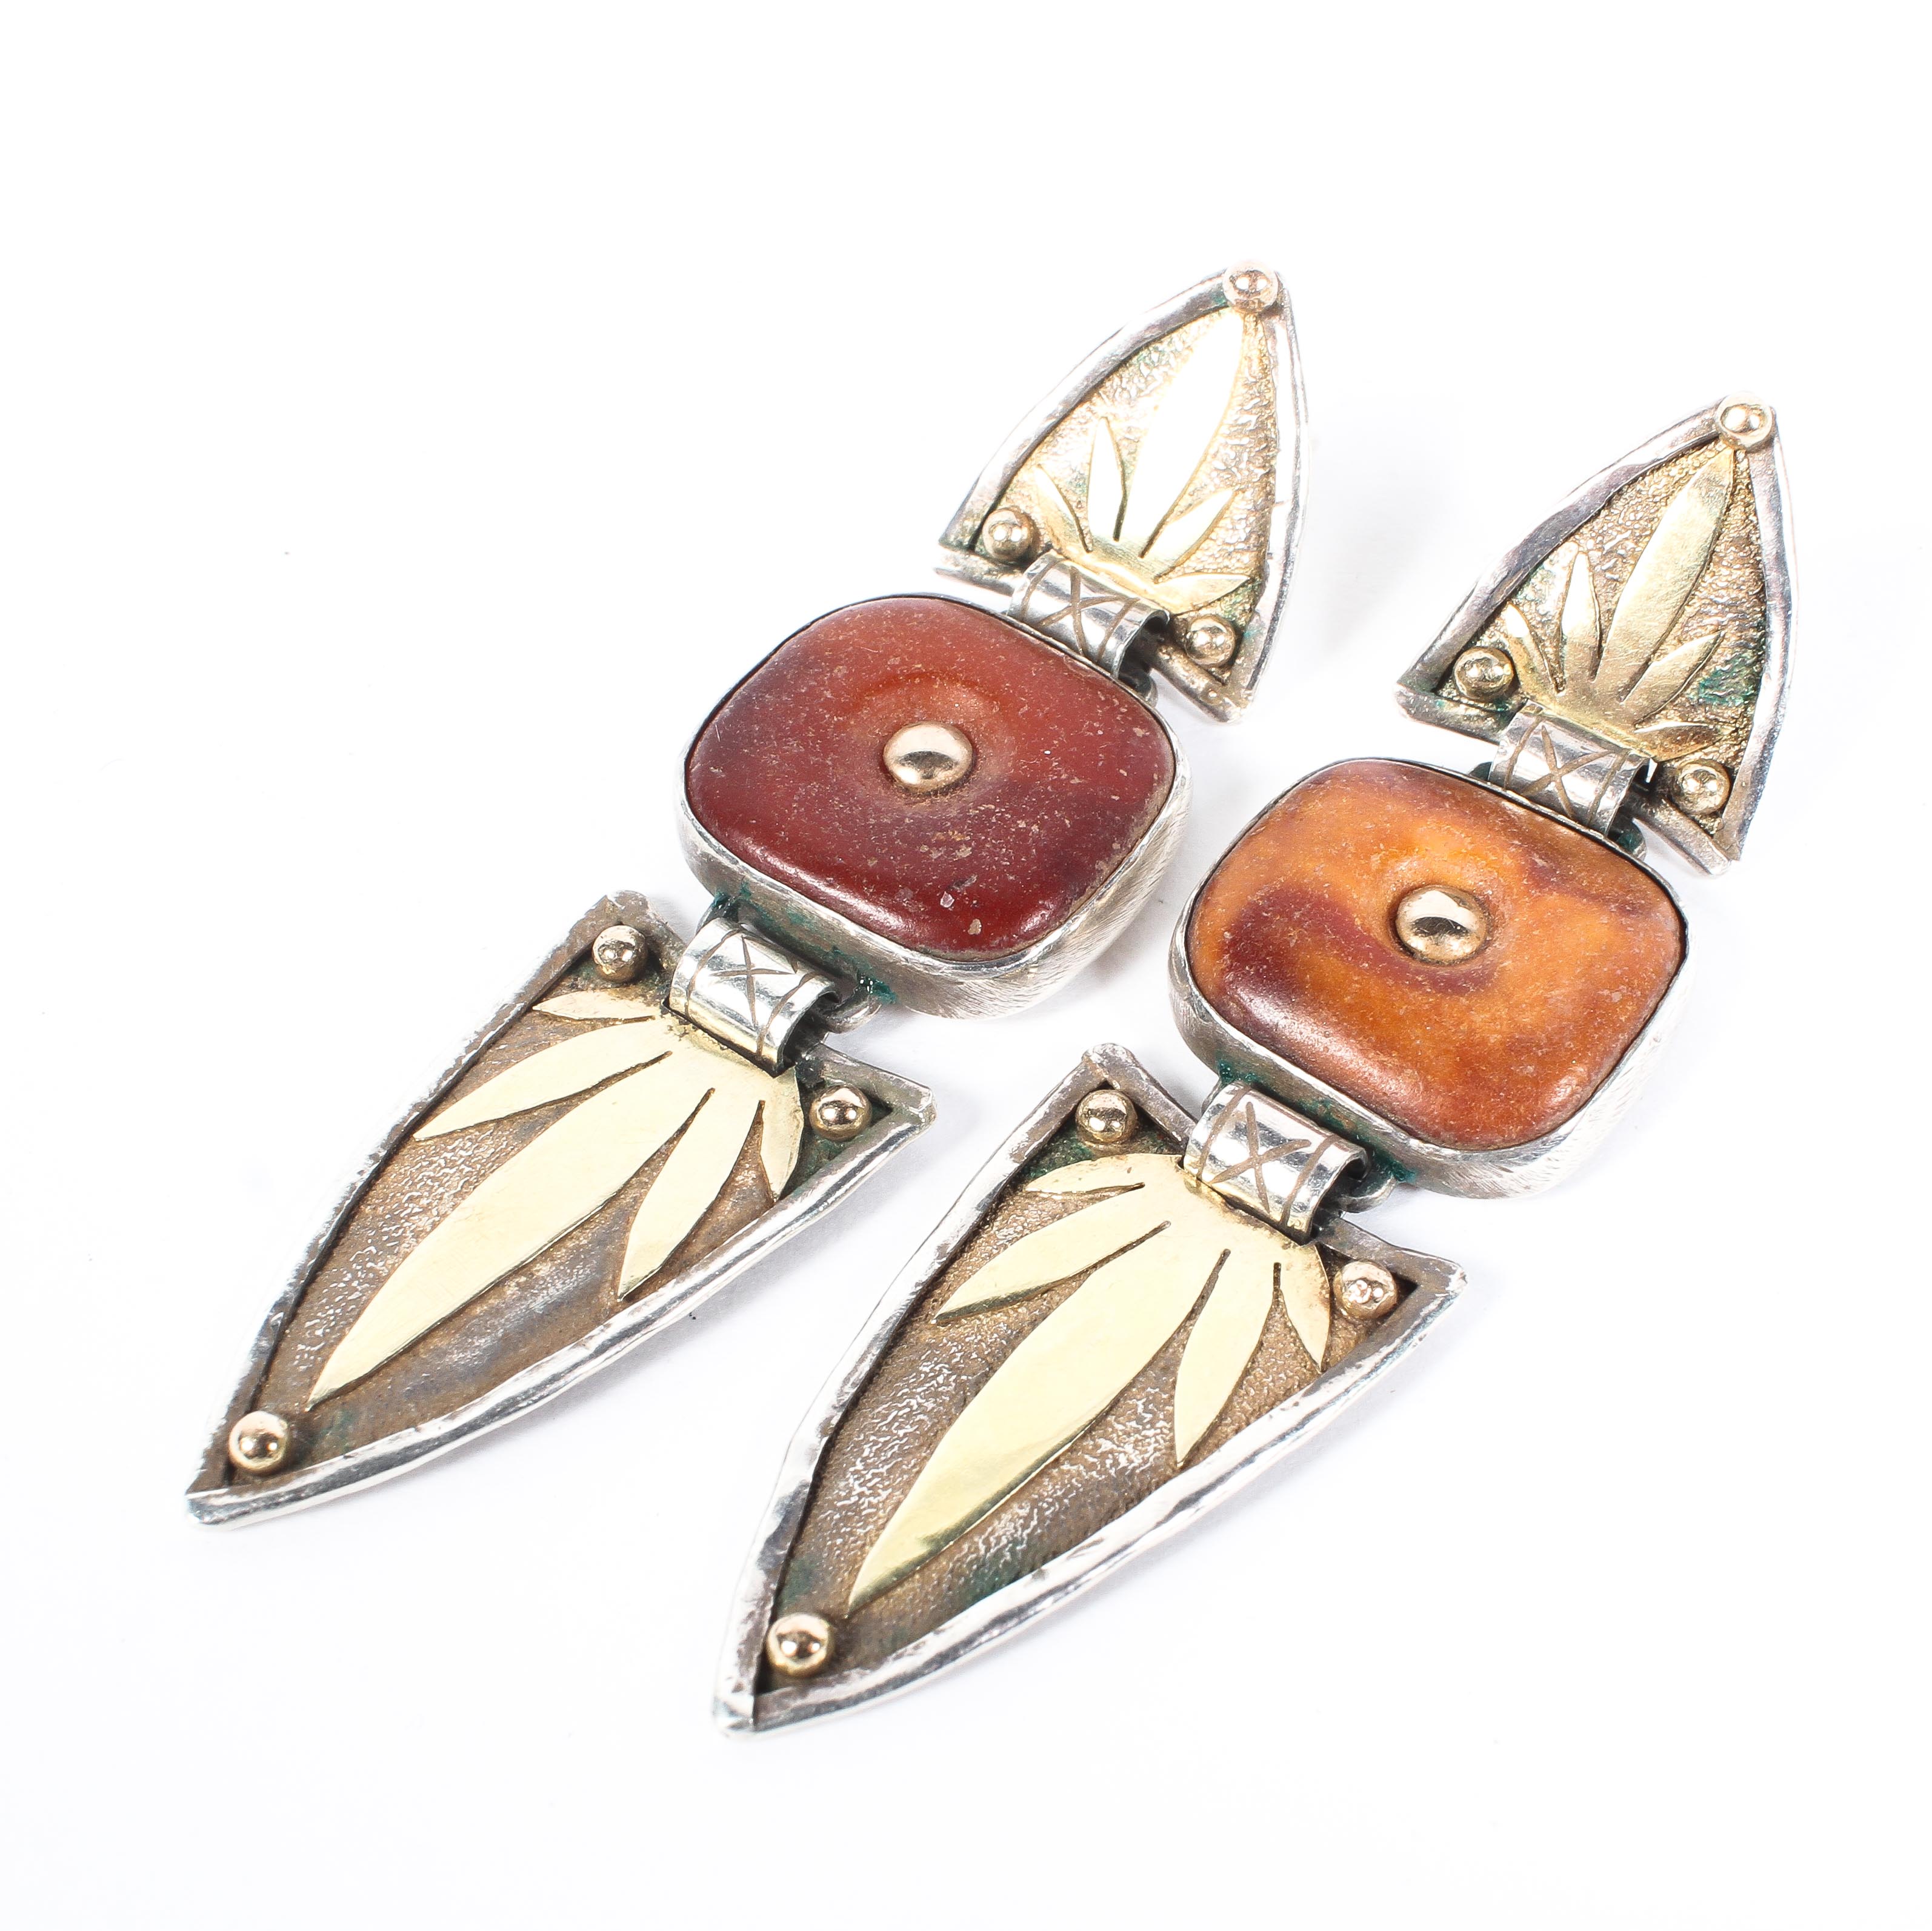 A pair of sterling silver and yellow metal drop earrings with amber coloured settings by CH London.